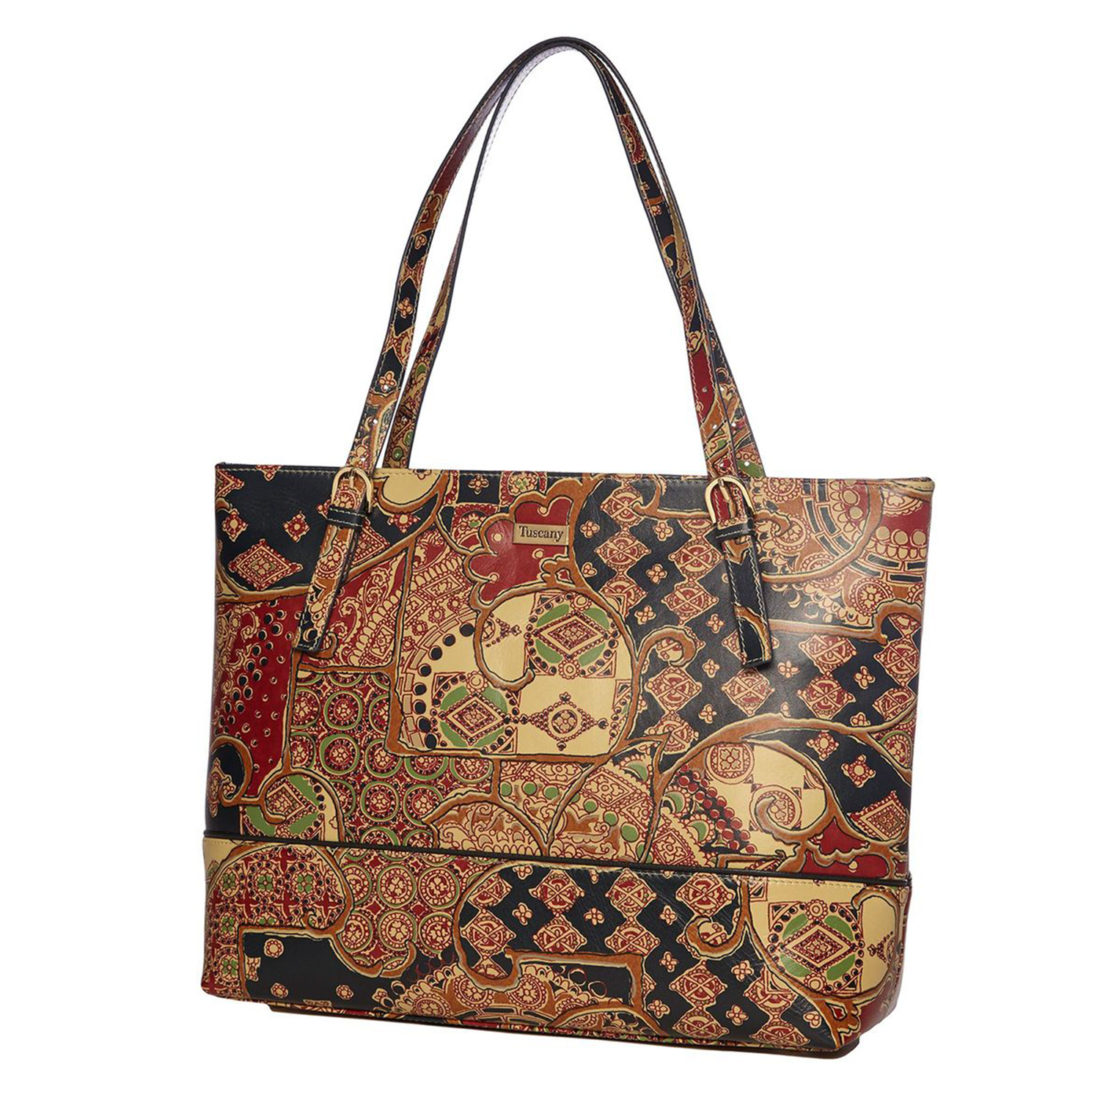 Tote Bags - Eye-Catching Totes Designed Online